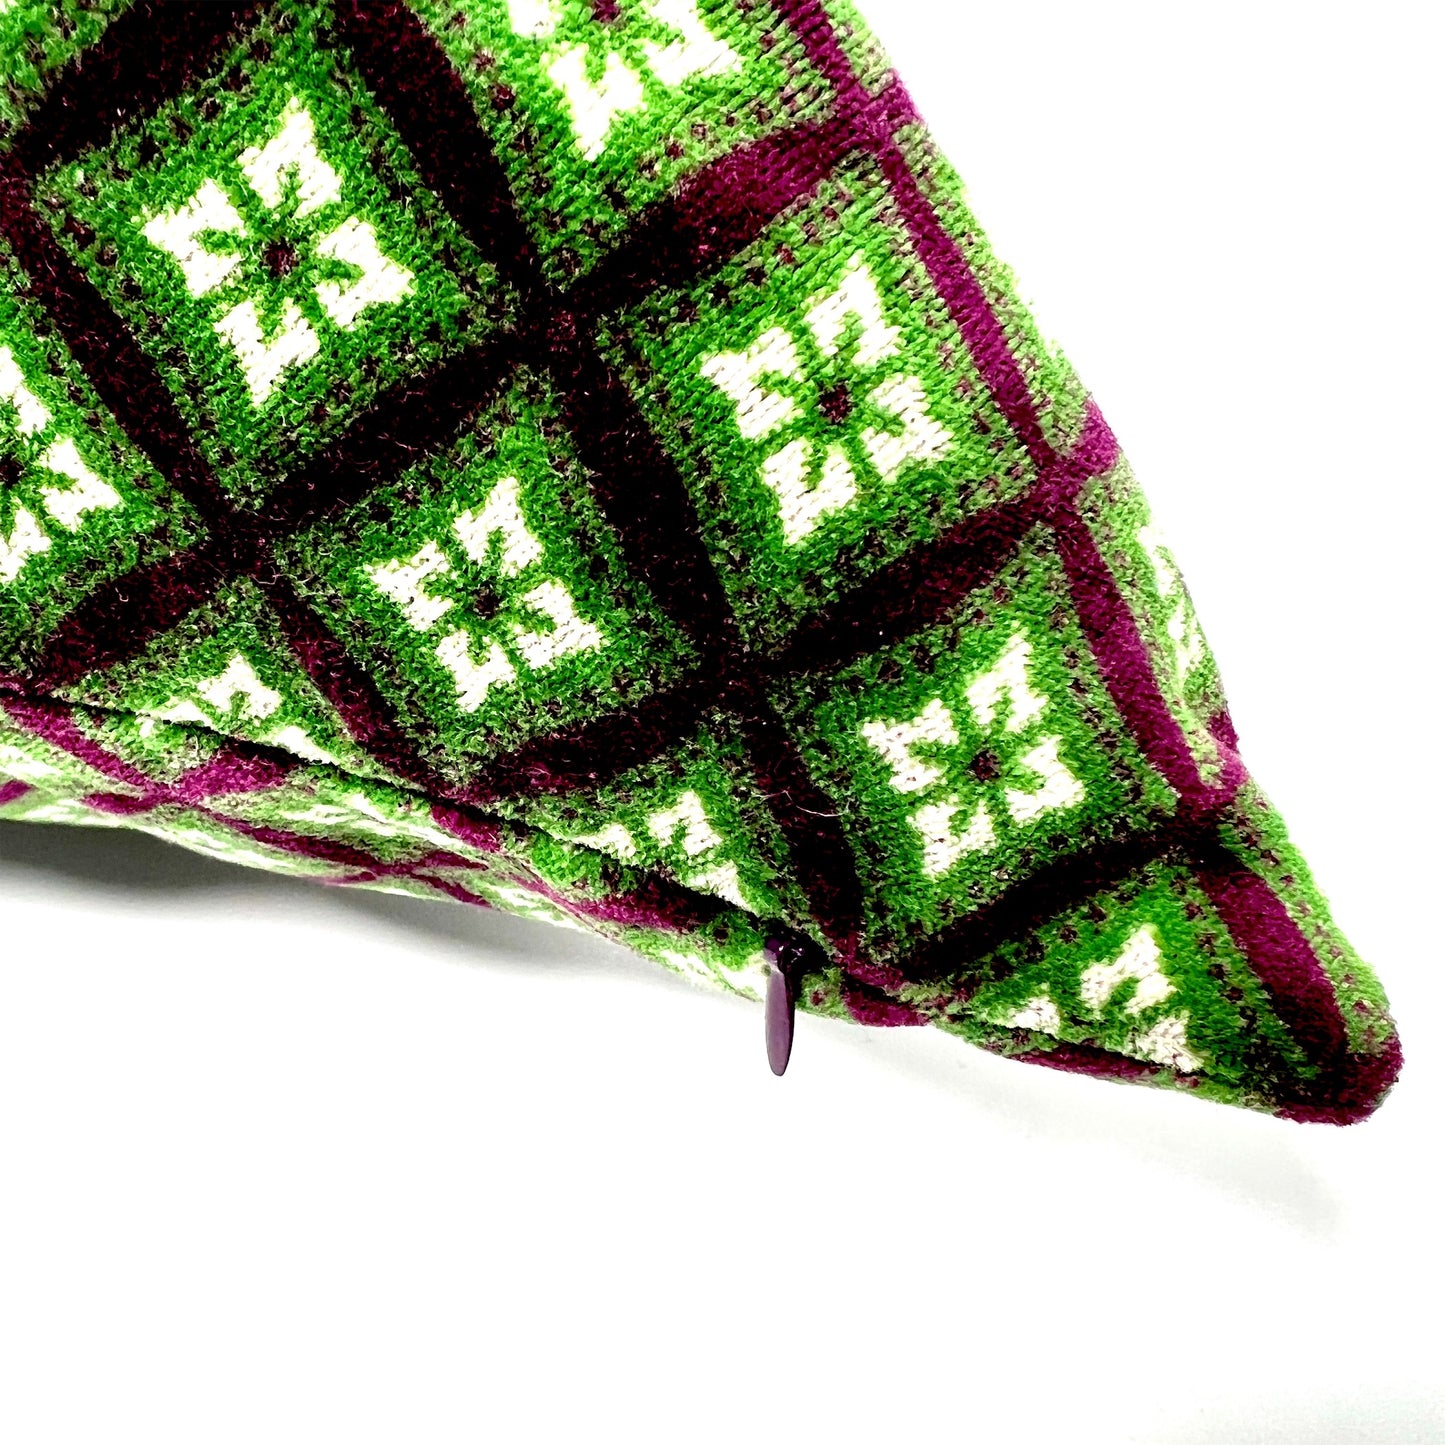 Cushion selected by Marthe / 幾何学模様のクッション